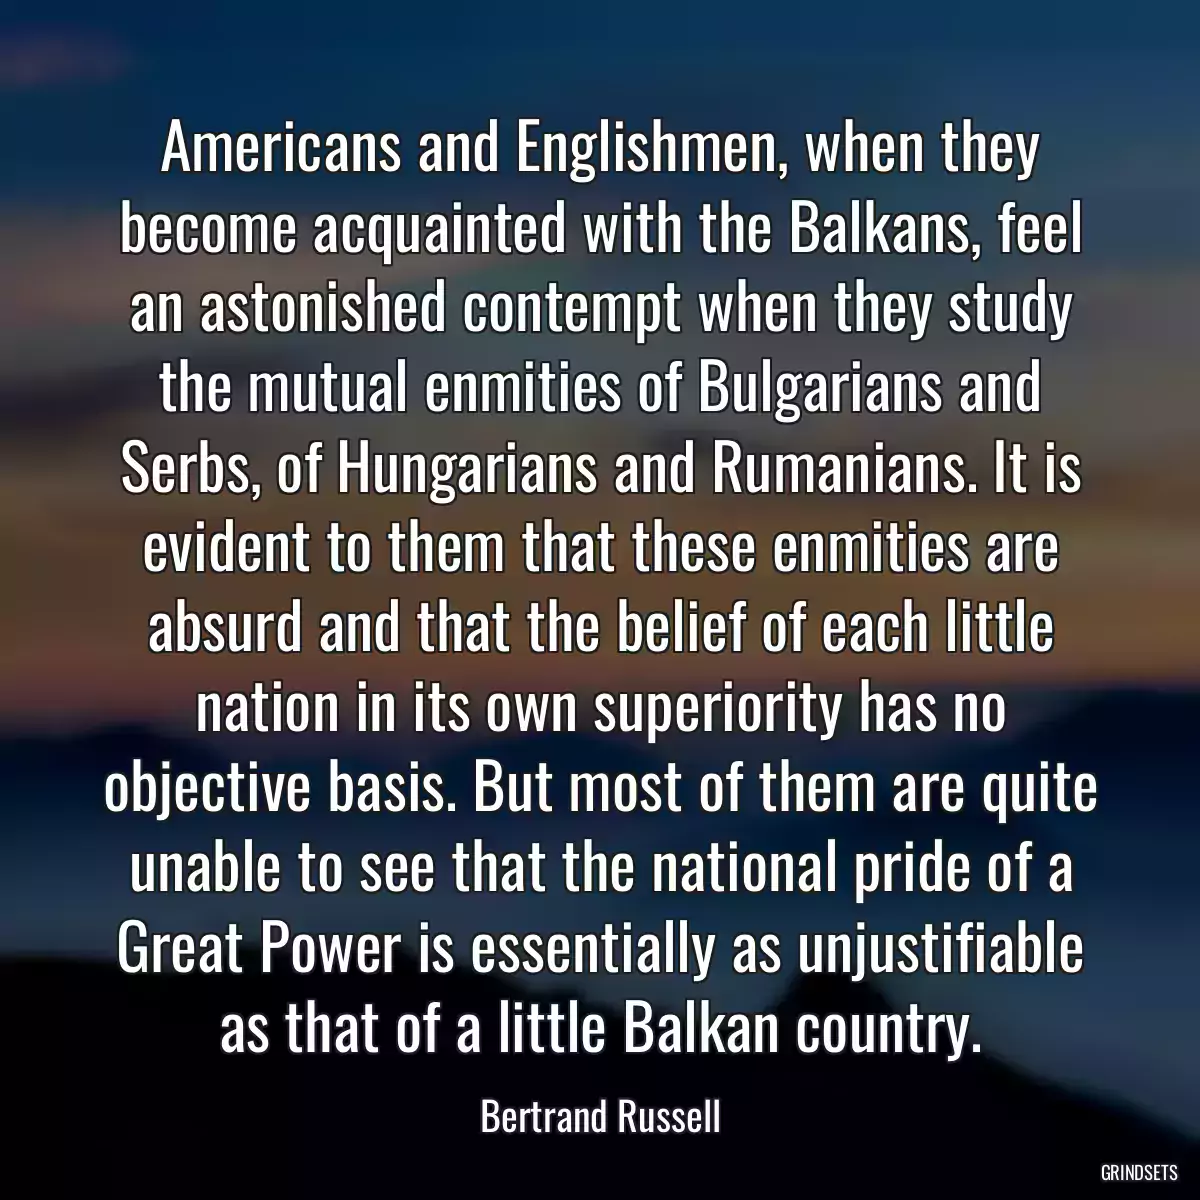 Americans and Englishmen, when they become acquainted with the Balkans, feel an astonished contempt when they study the mutual enmities of Bulgarians and Serbs, of Hungarians and Rumanians. It is evident to them that these enmities are absurd and that the belief of each little nation in its own superiority has no objective basis. But most of them are quite unable to see that the national pride of a Great Power is essentially as unjustifiable as that of a little Balkan country.